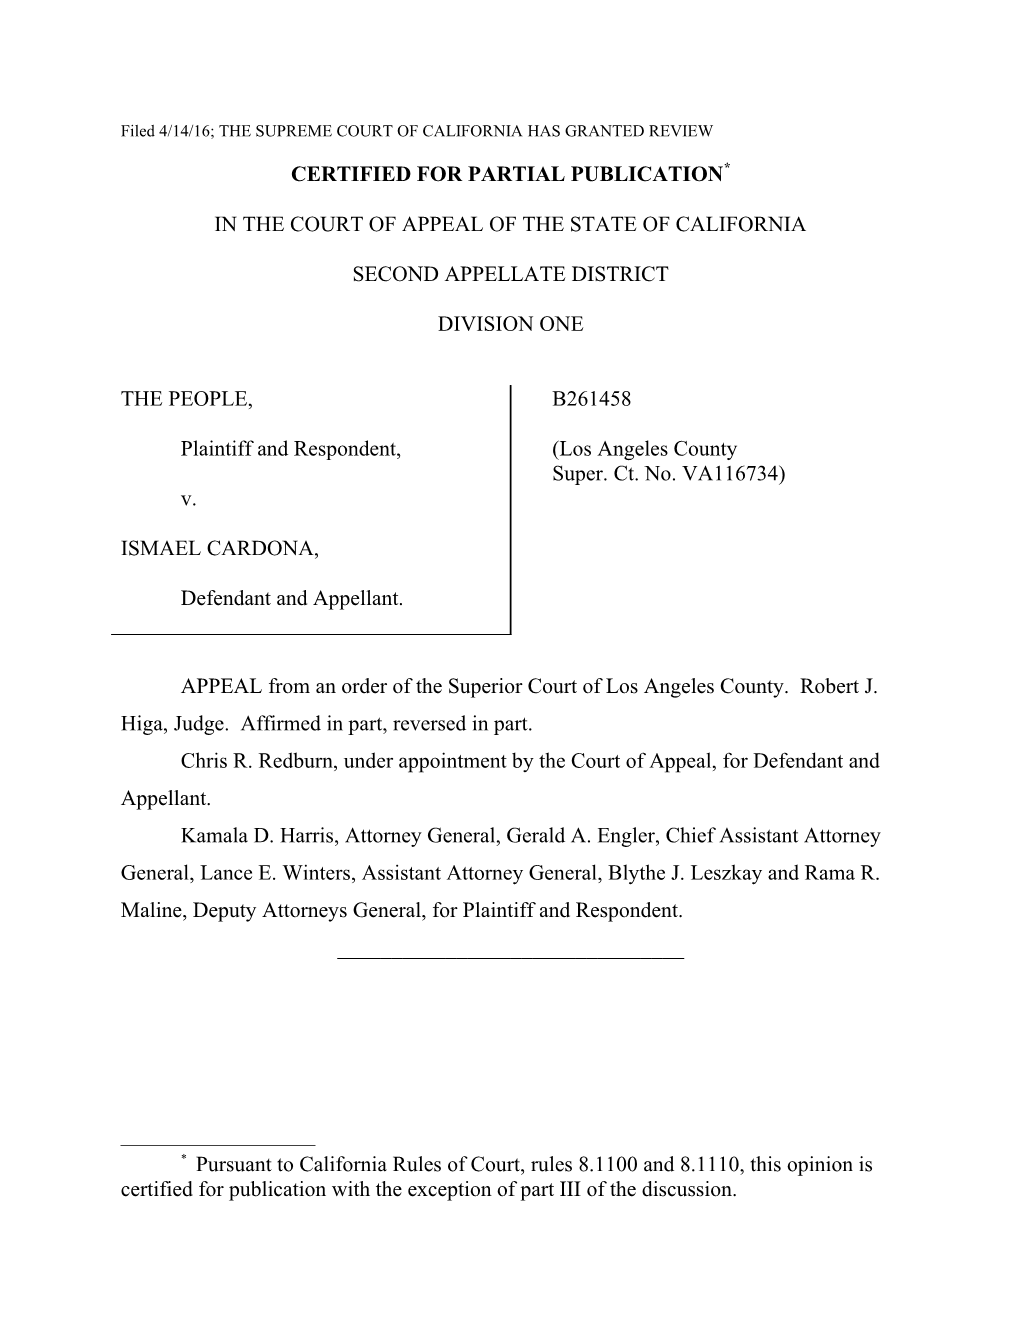 Filed 4/14/16; the SUPREME COURT of CALIFORNIA HAS GRANTED REVIEW